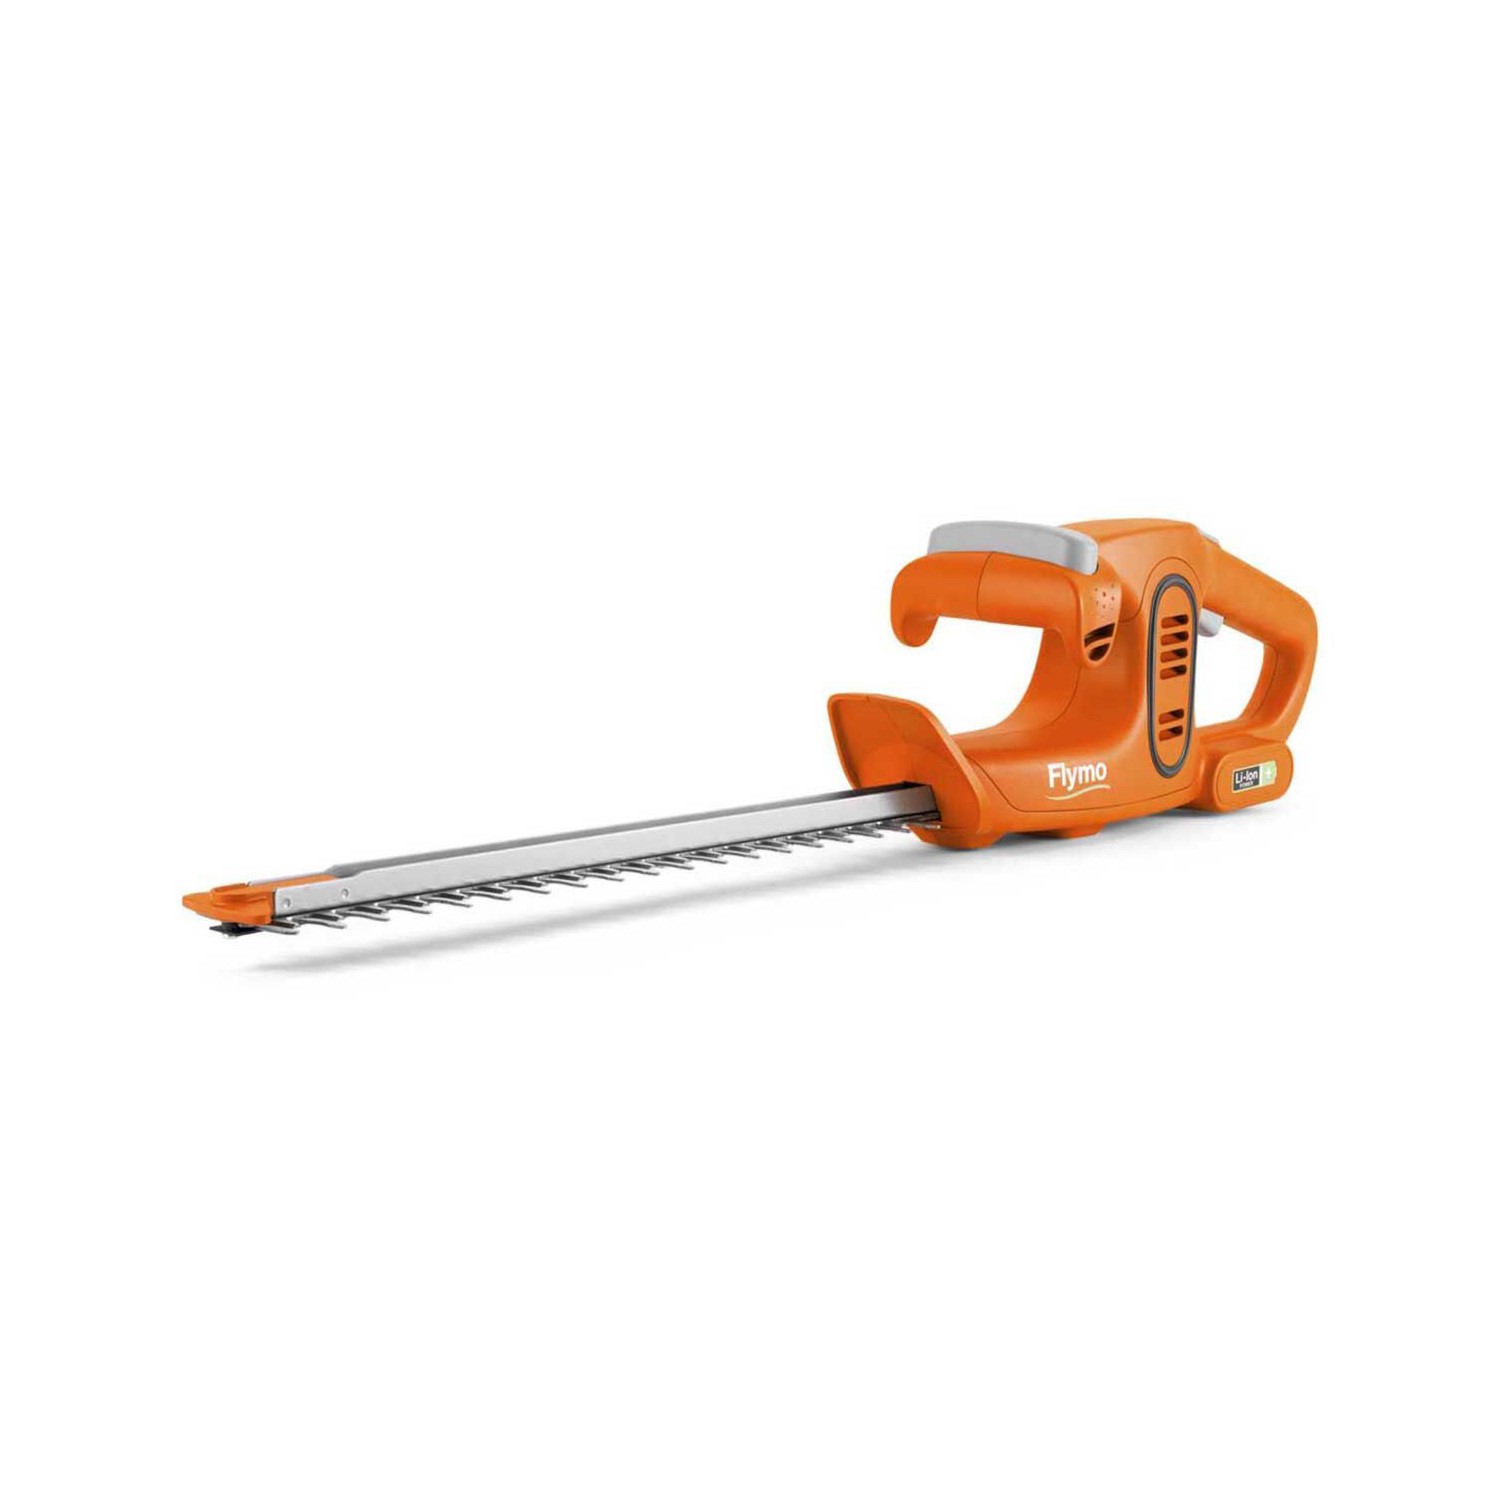 Photos - Other for Computer Flymo SimpliCut 40cm 14V Cordless Hedge Trimmer 967986201 